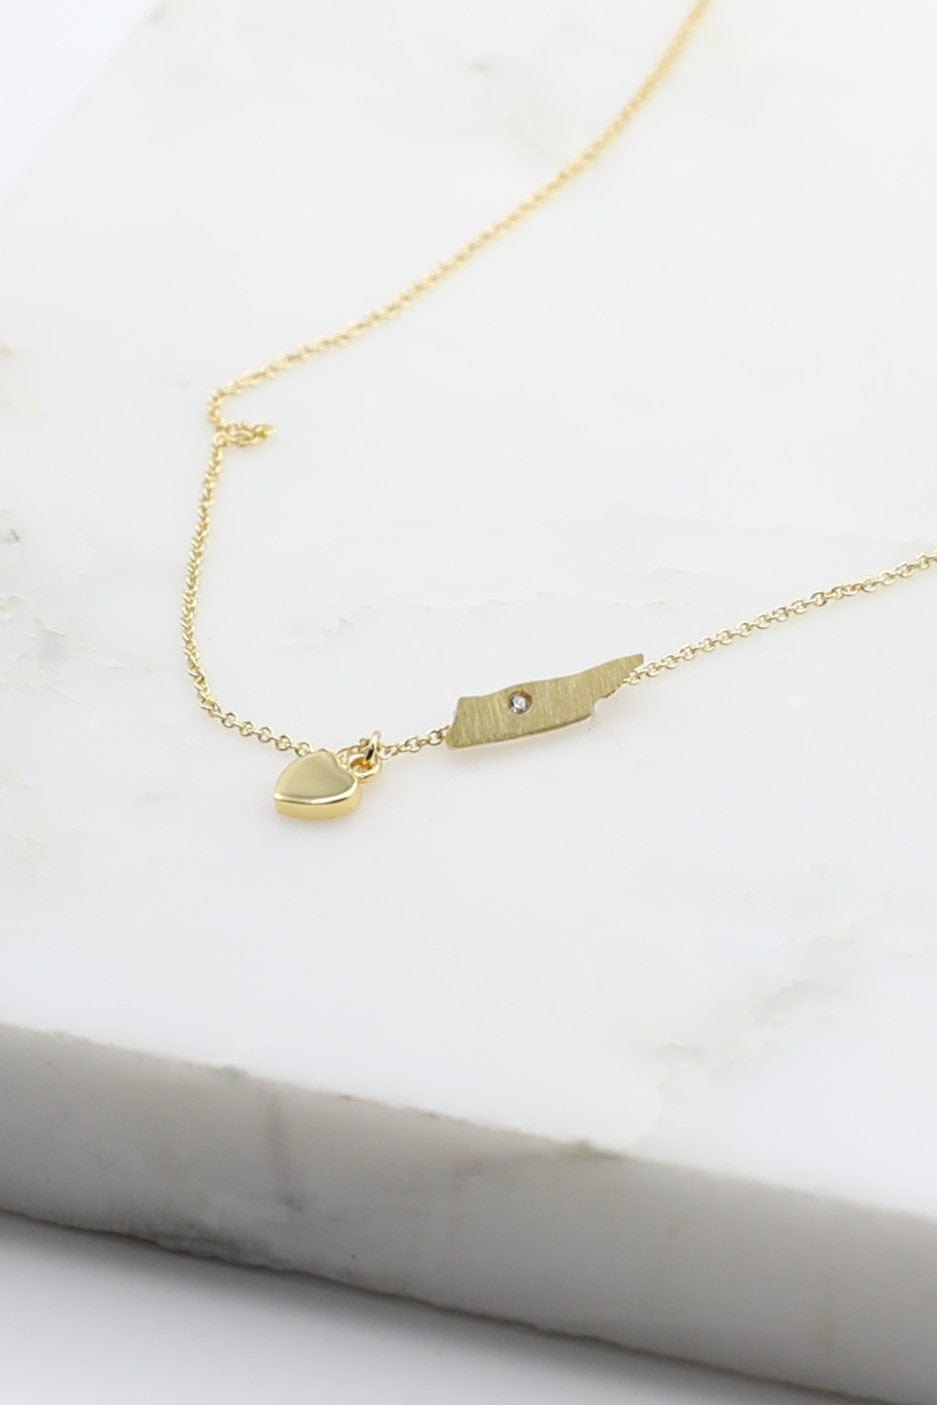 Gold Tennessee Heart Necklace